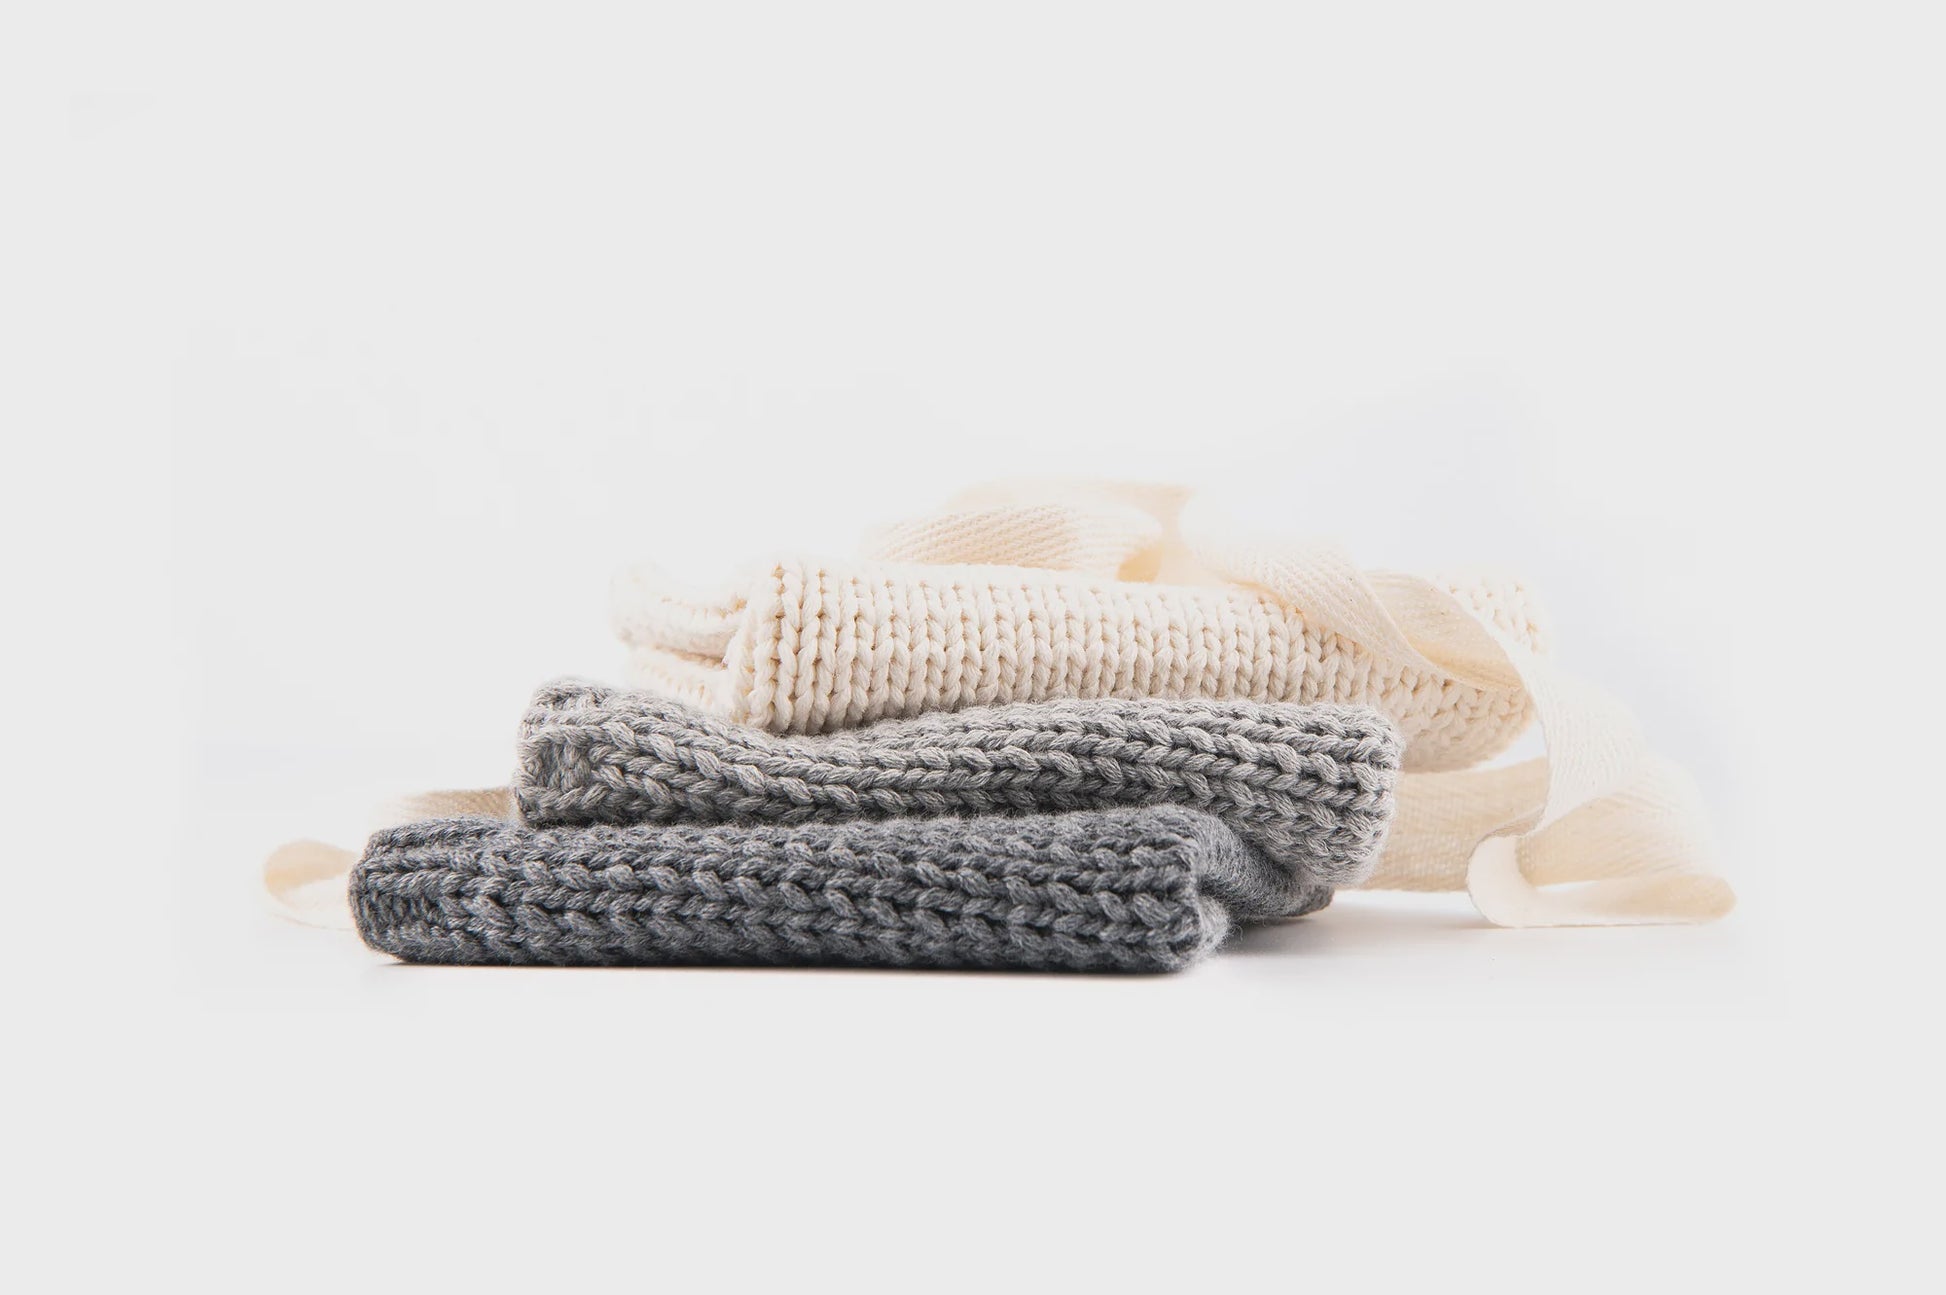 Caliwoods | Knitted Cotton Cloths - Found My Way Invercargill